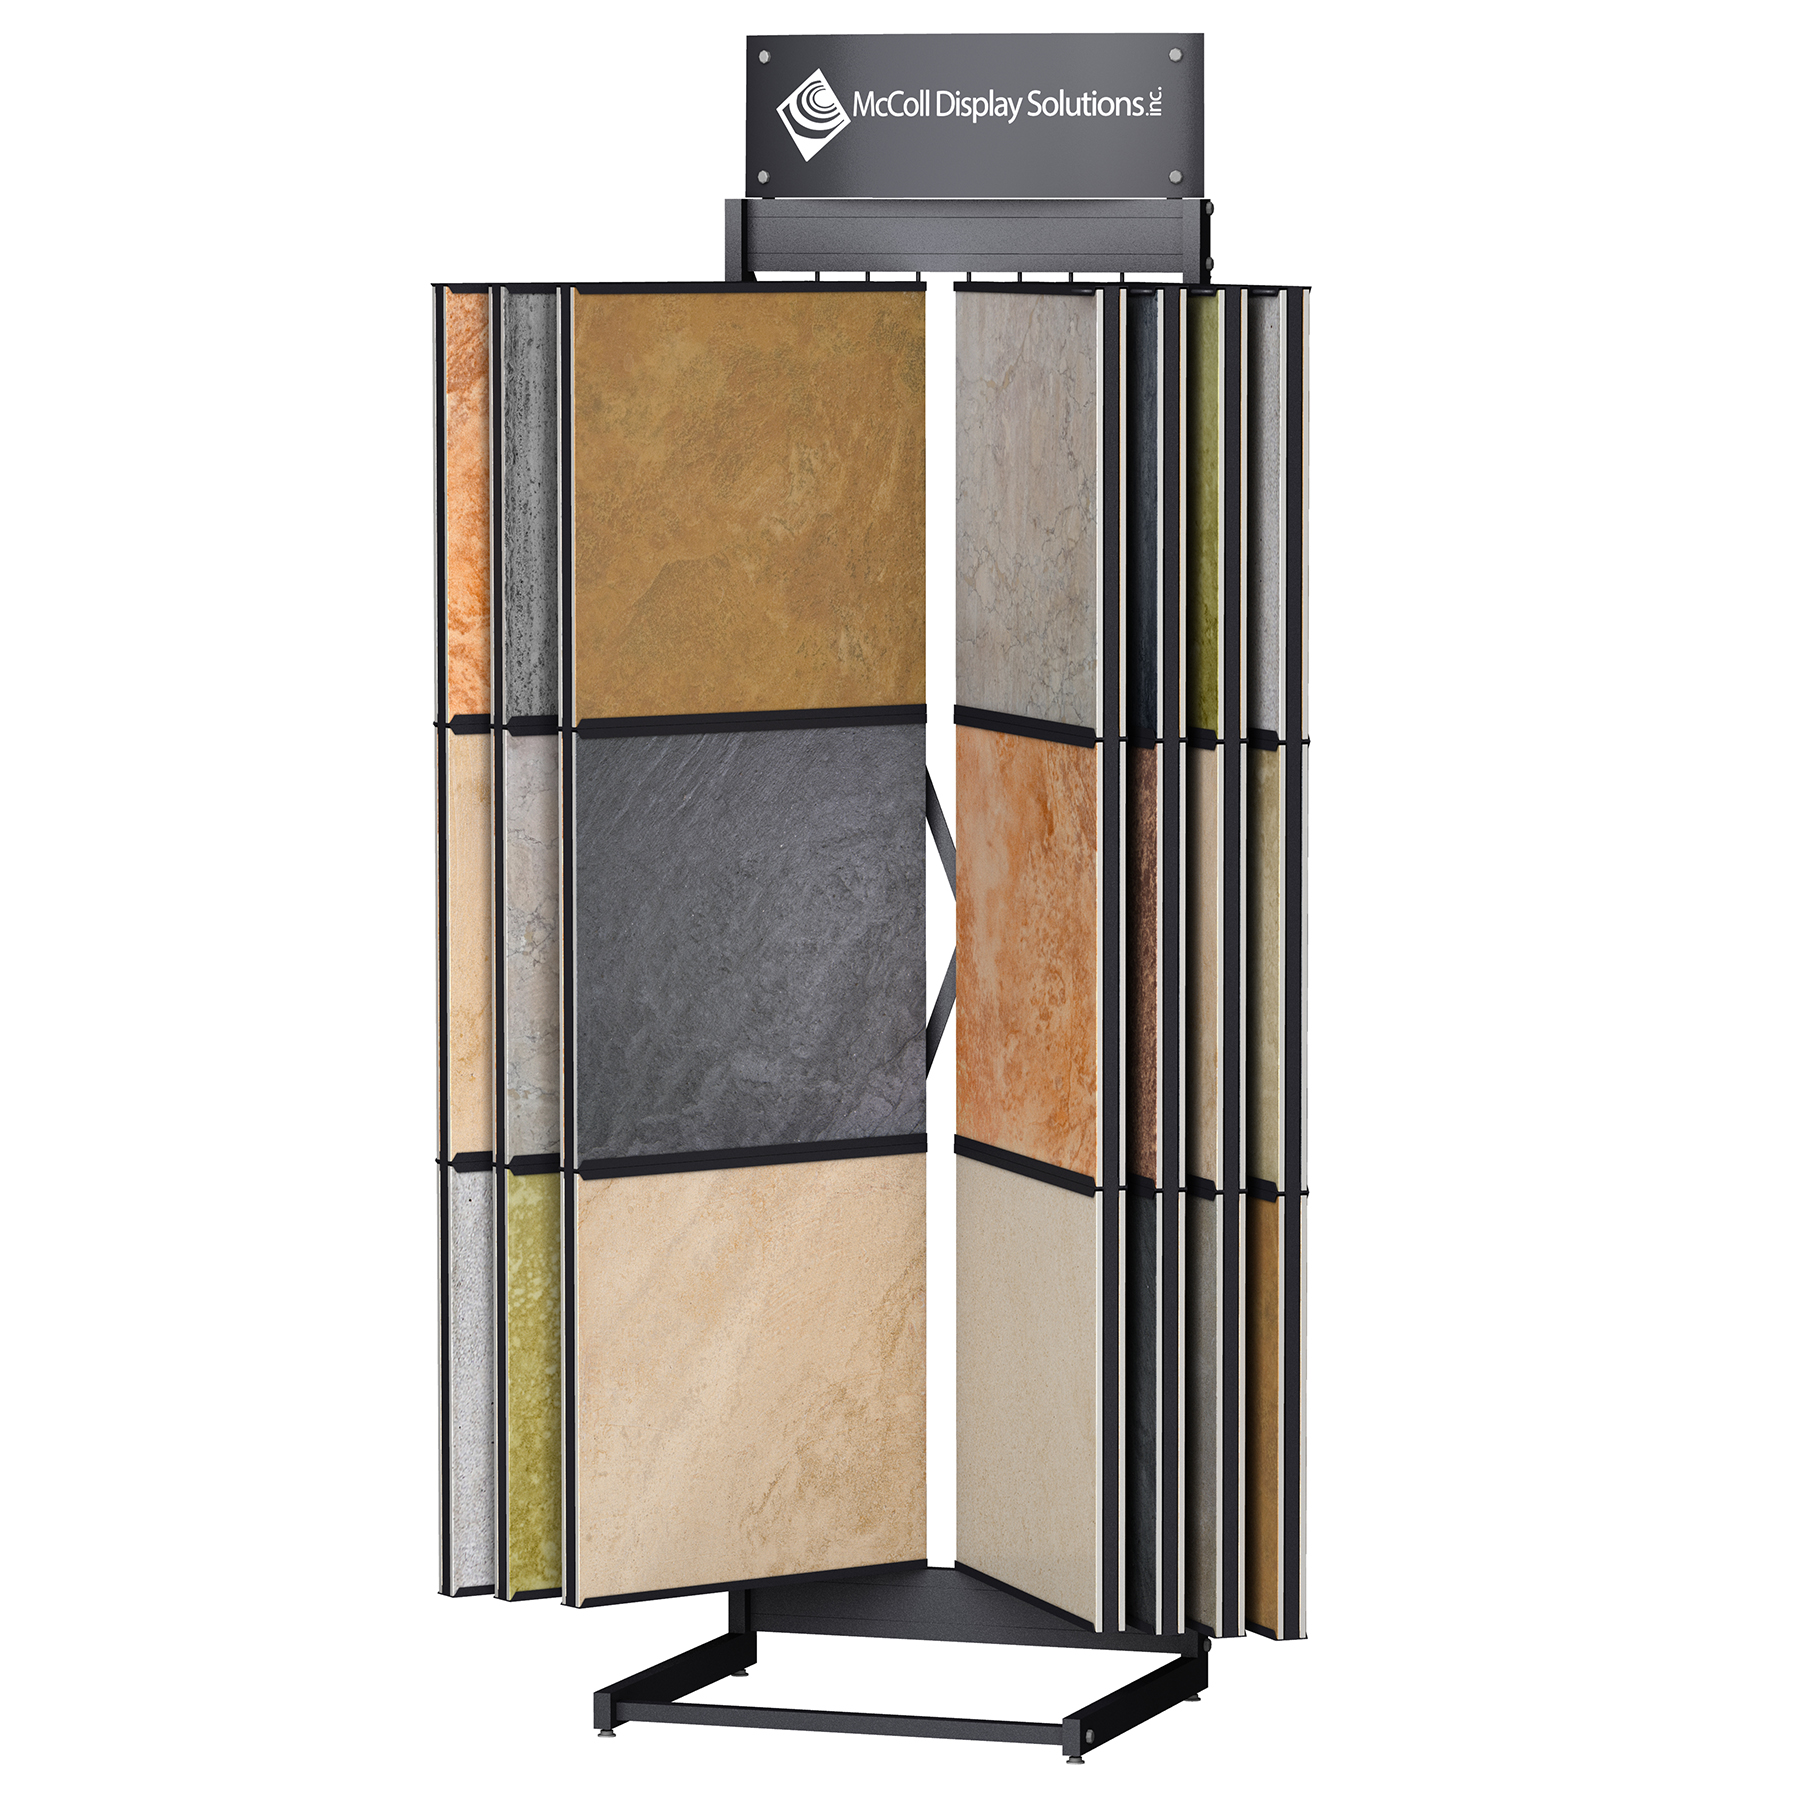 Durable Steel Wing Rack Channel System Tower Holds Ceramic Tile and Stone Quartz Granite Travertine Product Samples